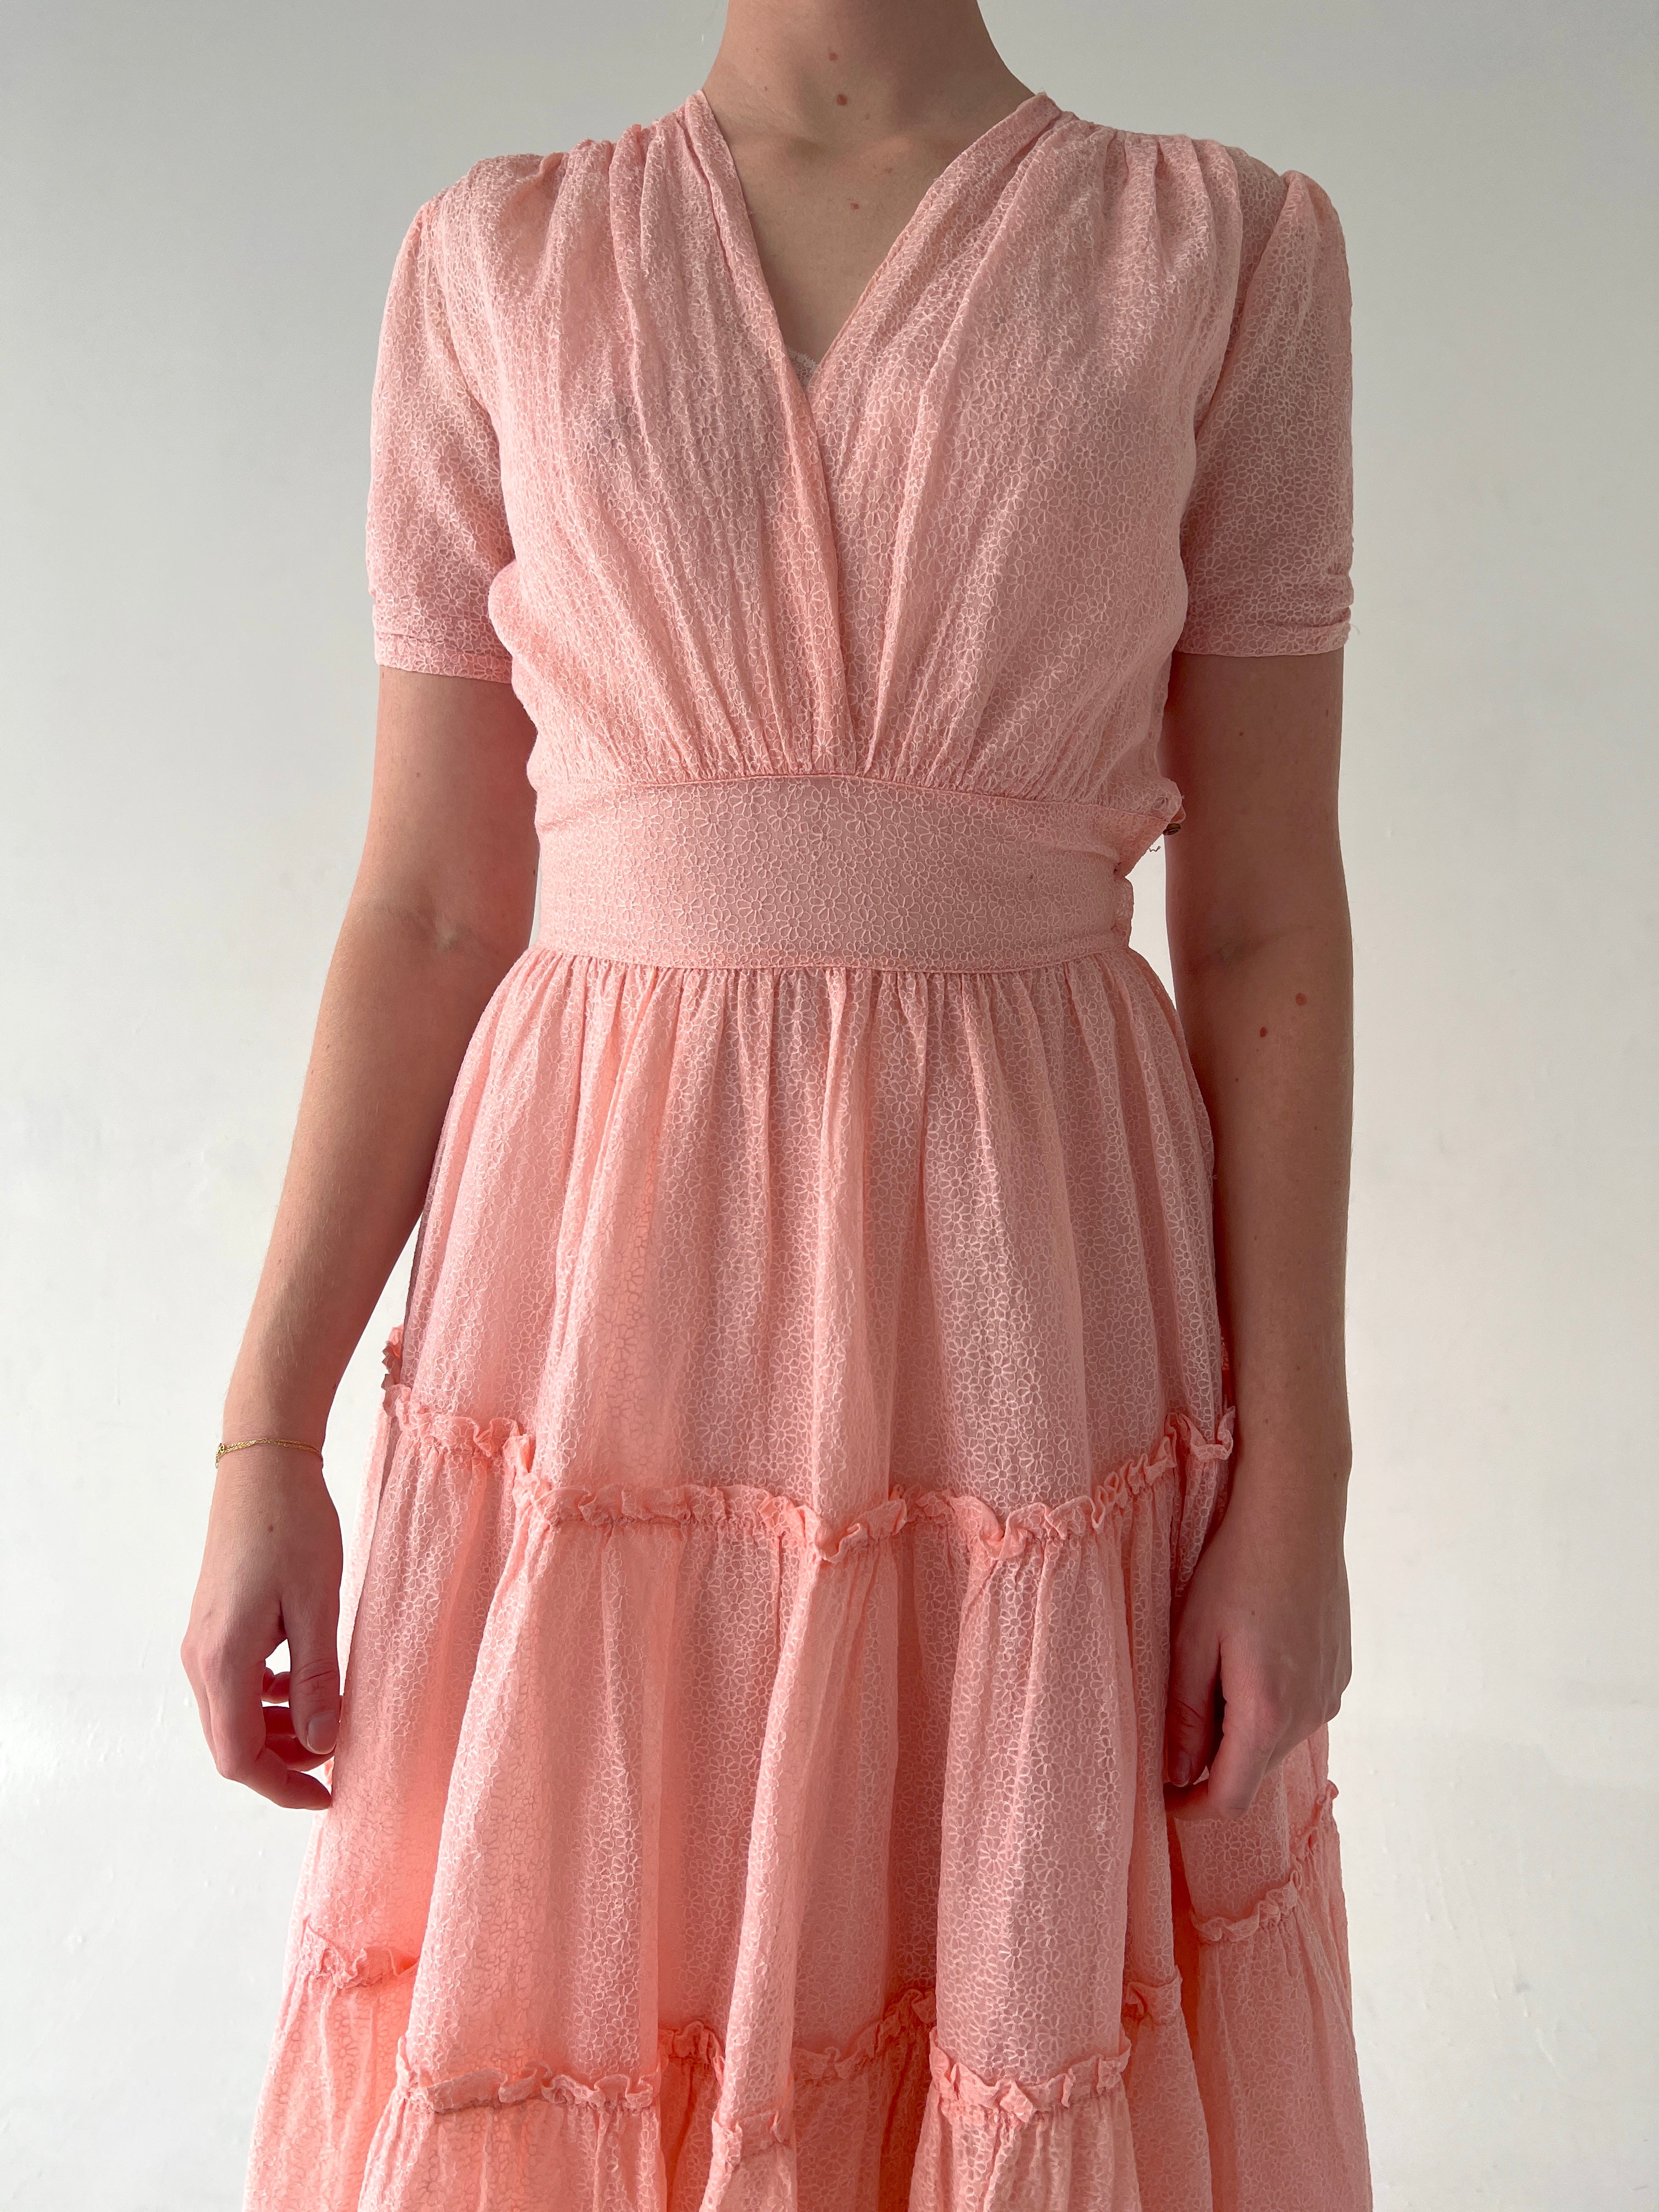 1930's Pink Gown with Embroidered Floral Print